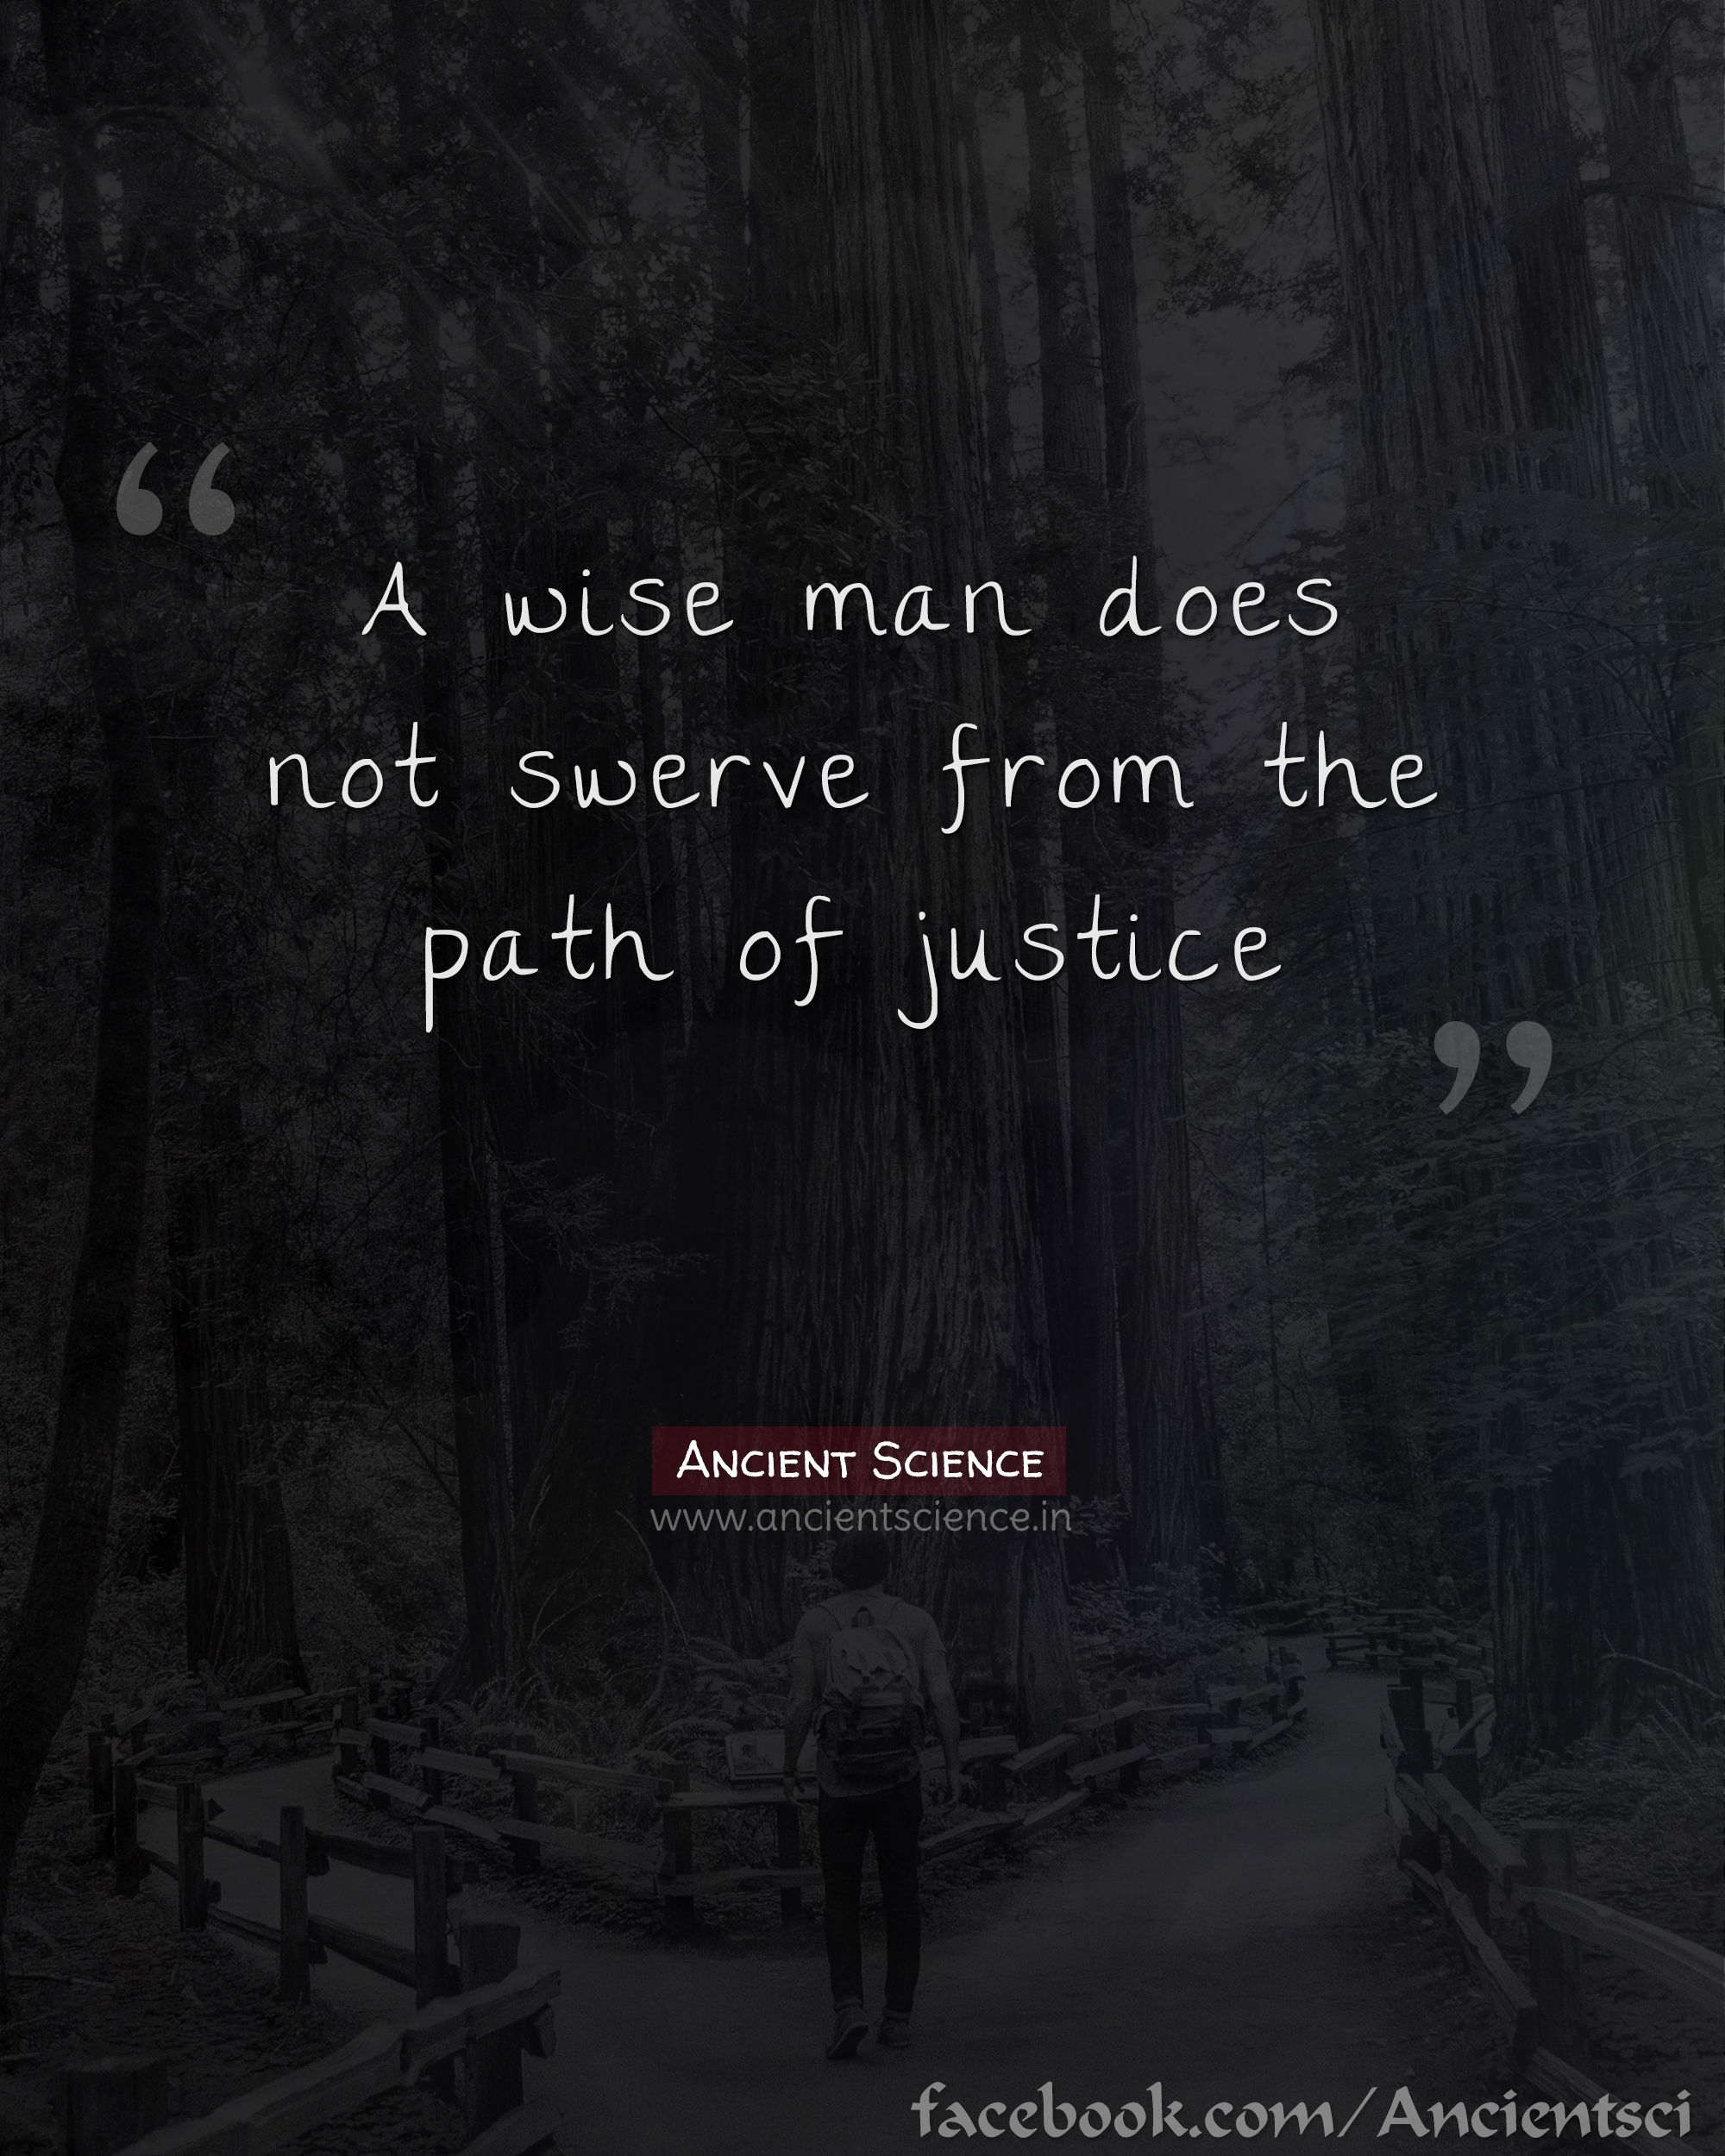 A wise man, does not swerve from the path of justice